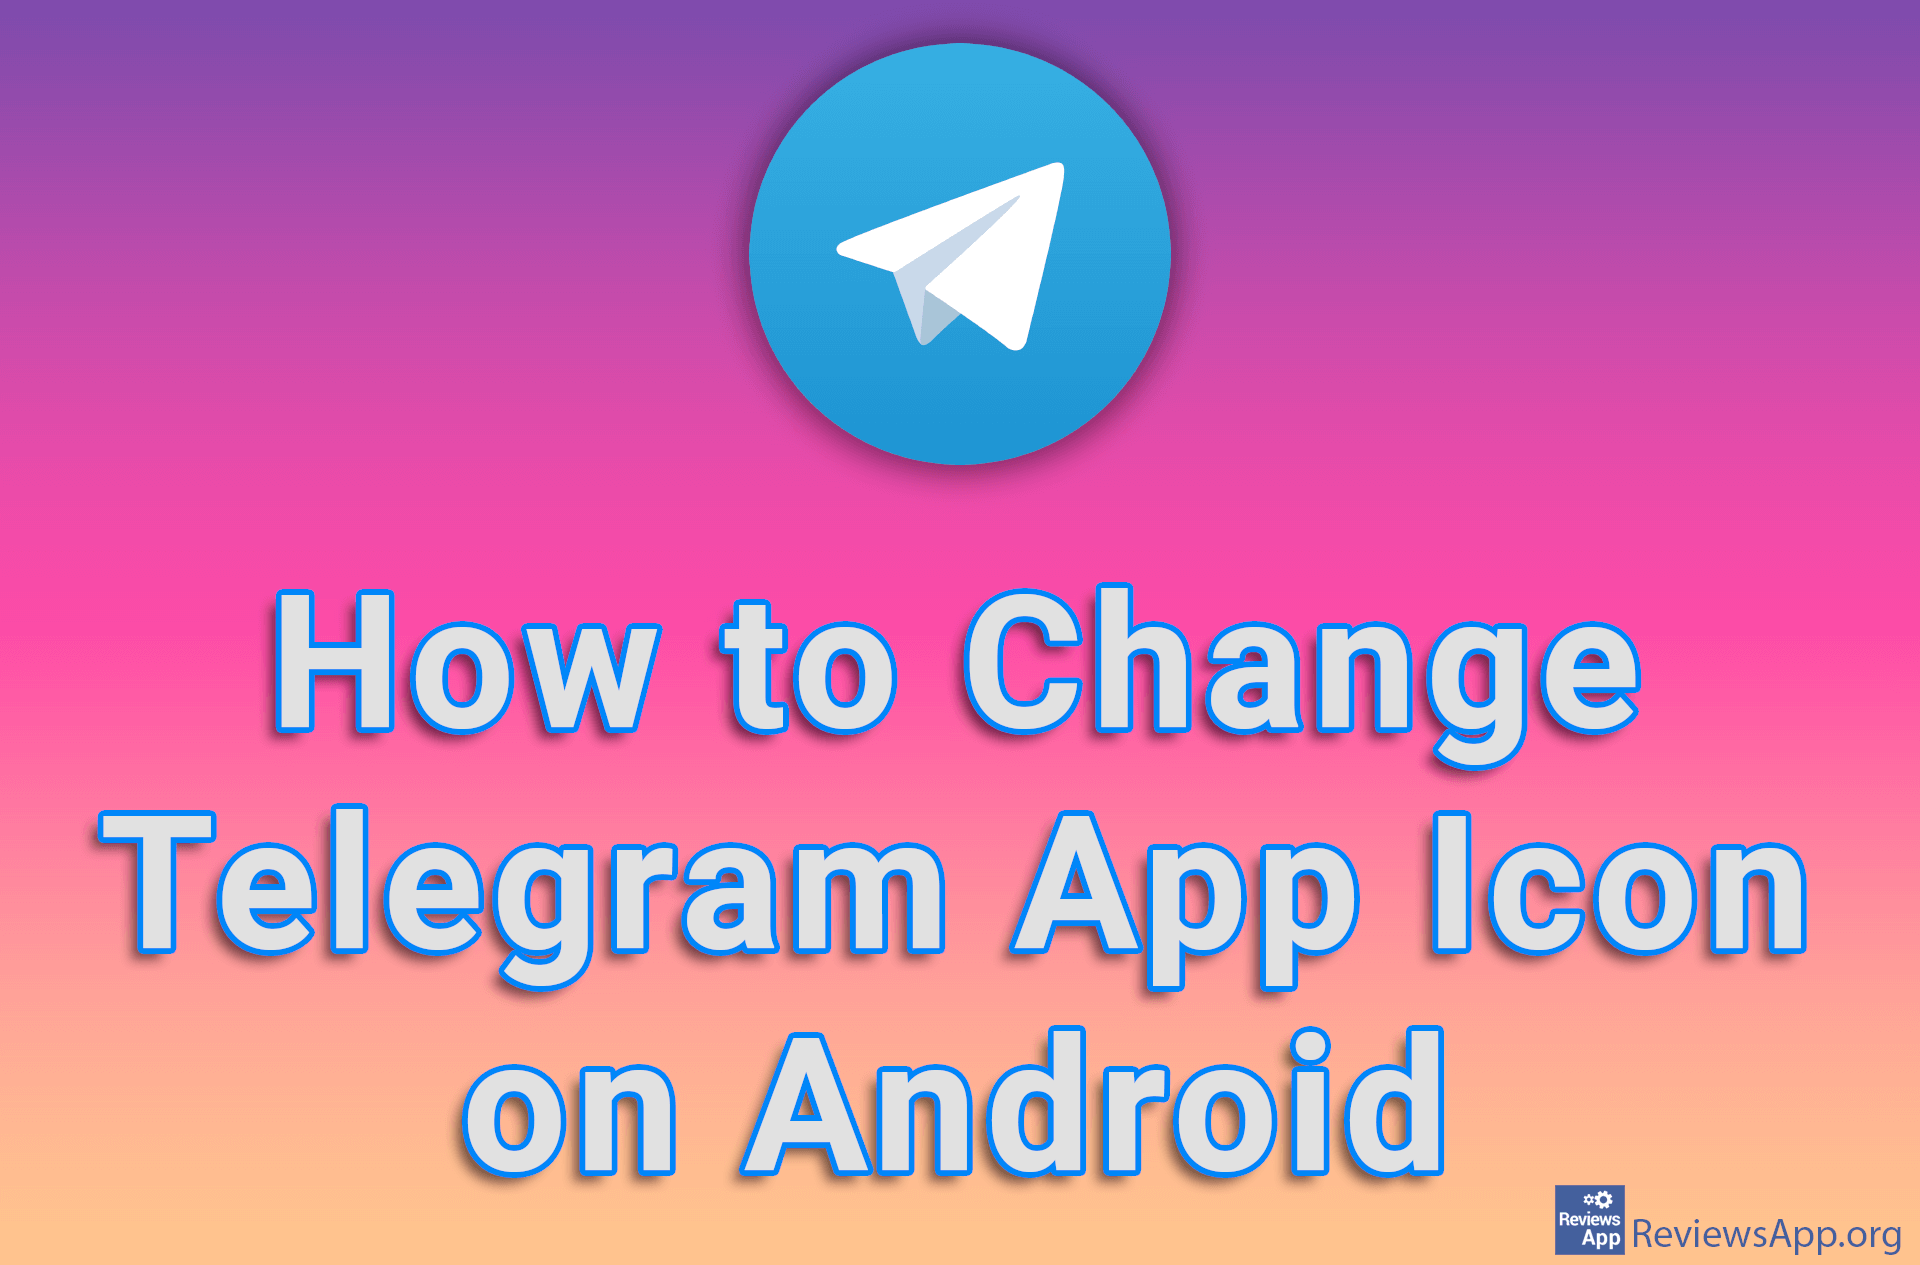 How to Change Telegram App Icon on Android